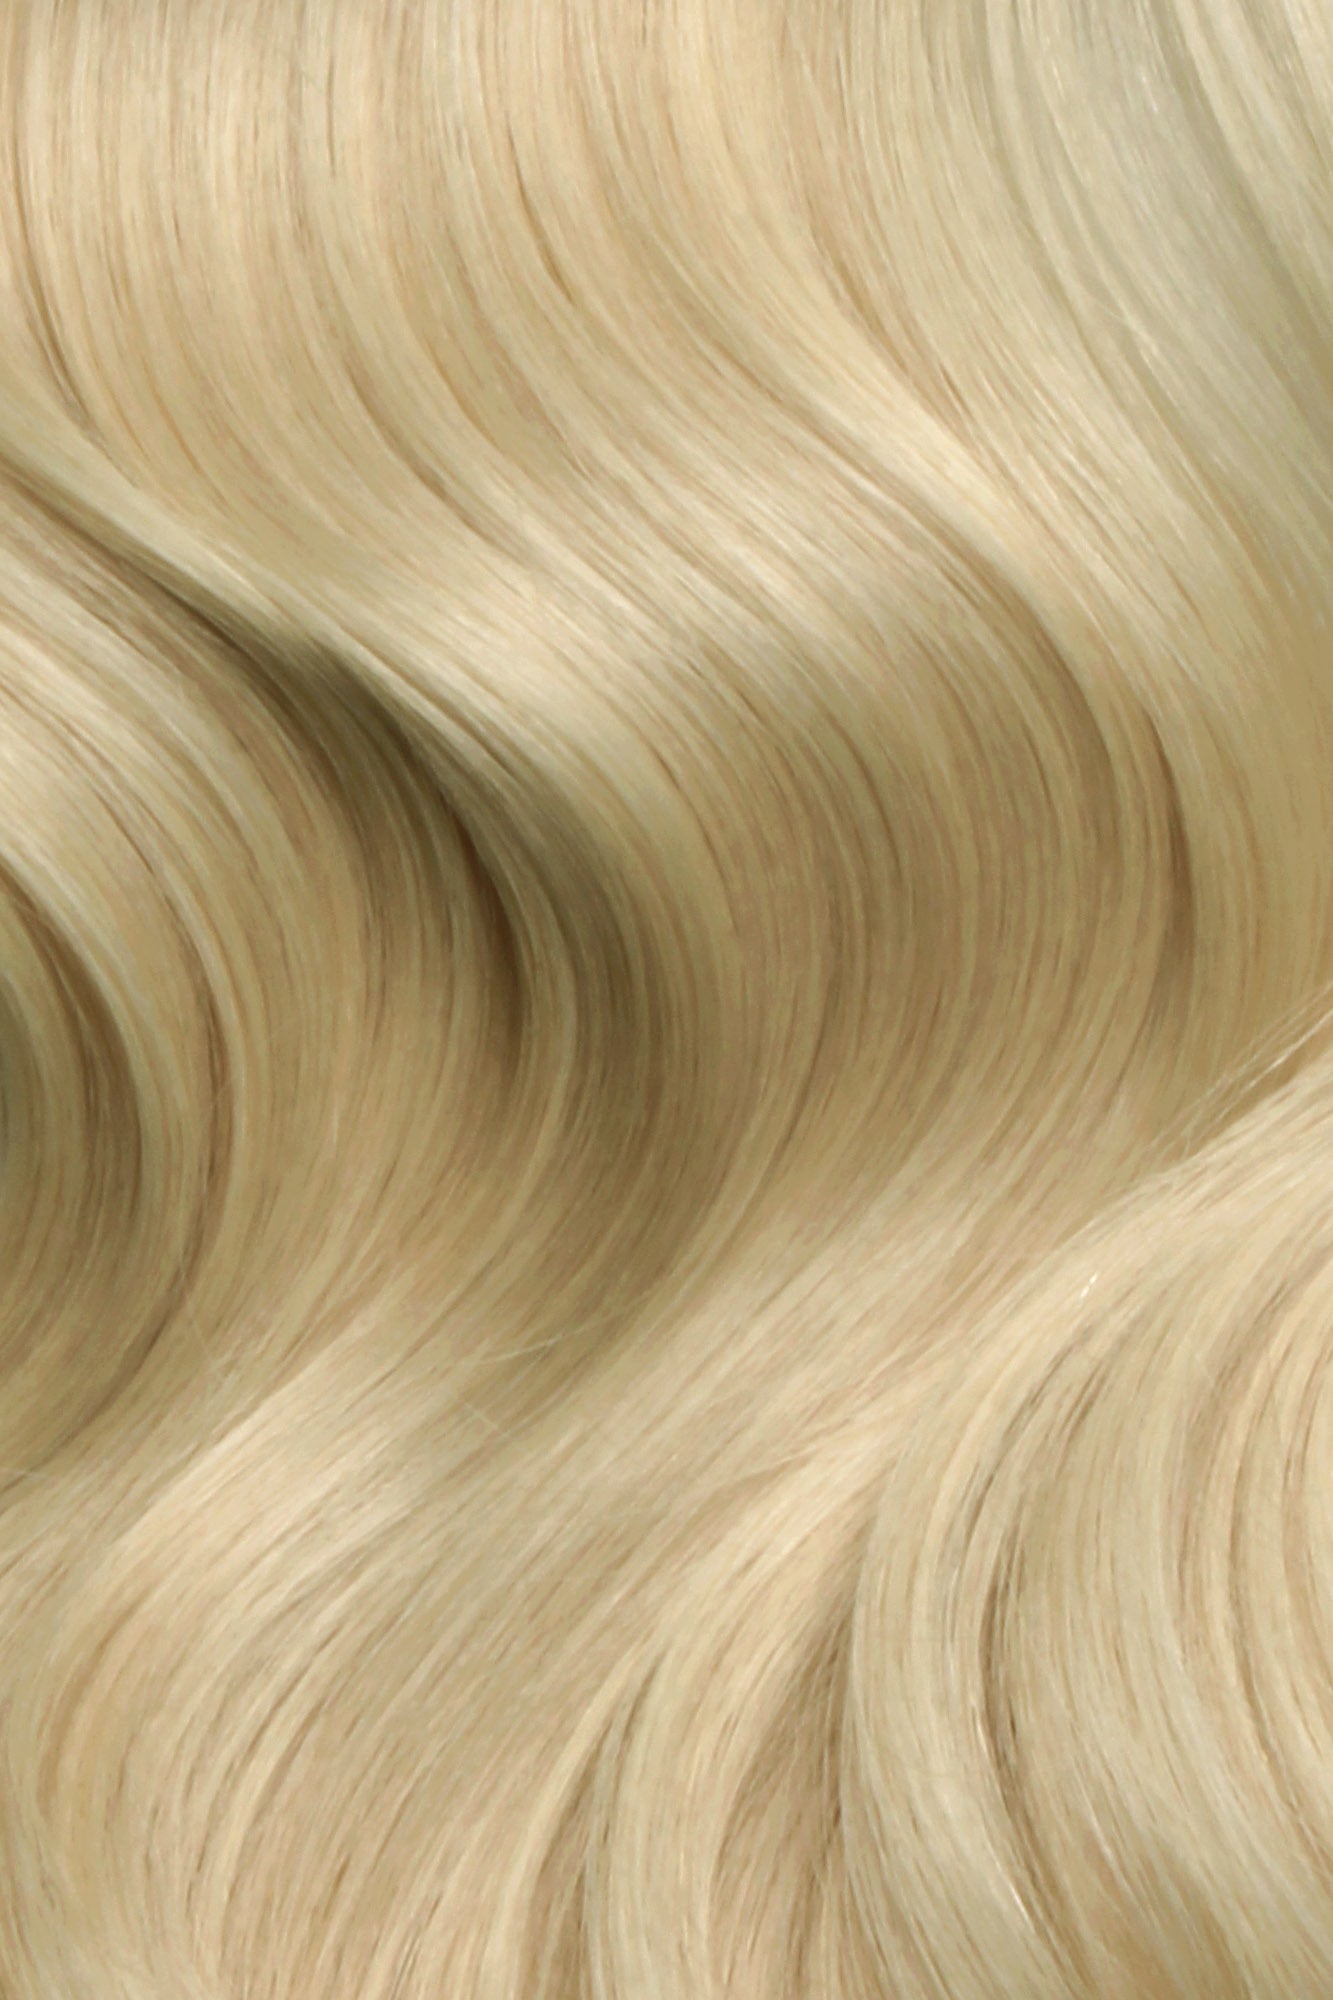 Nano Bonds 24 Inches - SWAY Hair Extensions Honey-Blonde-613 Ultra-fine, invisible bonds for a flawless, natural look. 100% Remy Human hair, lightweight and versatile. Reusable and perfect for individual or salon use.